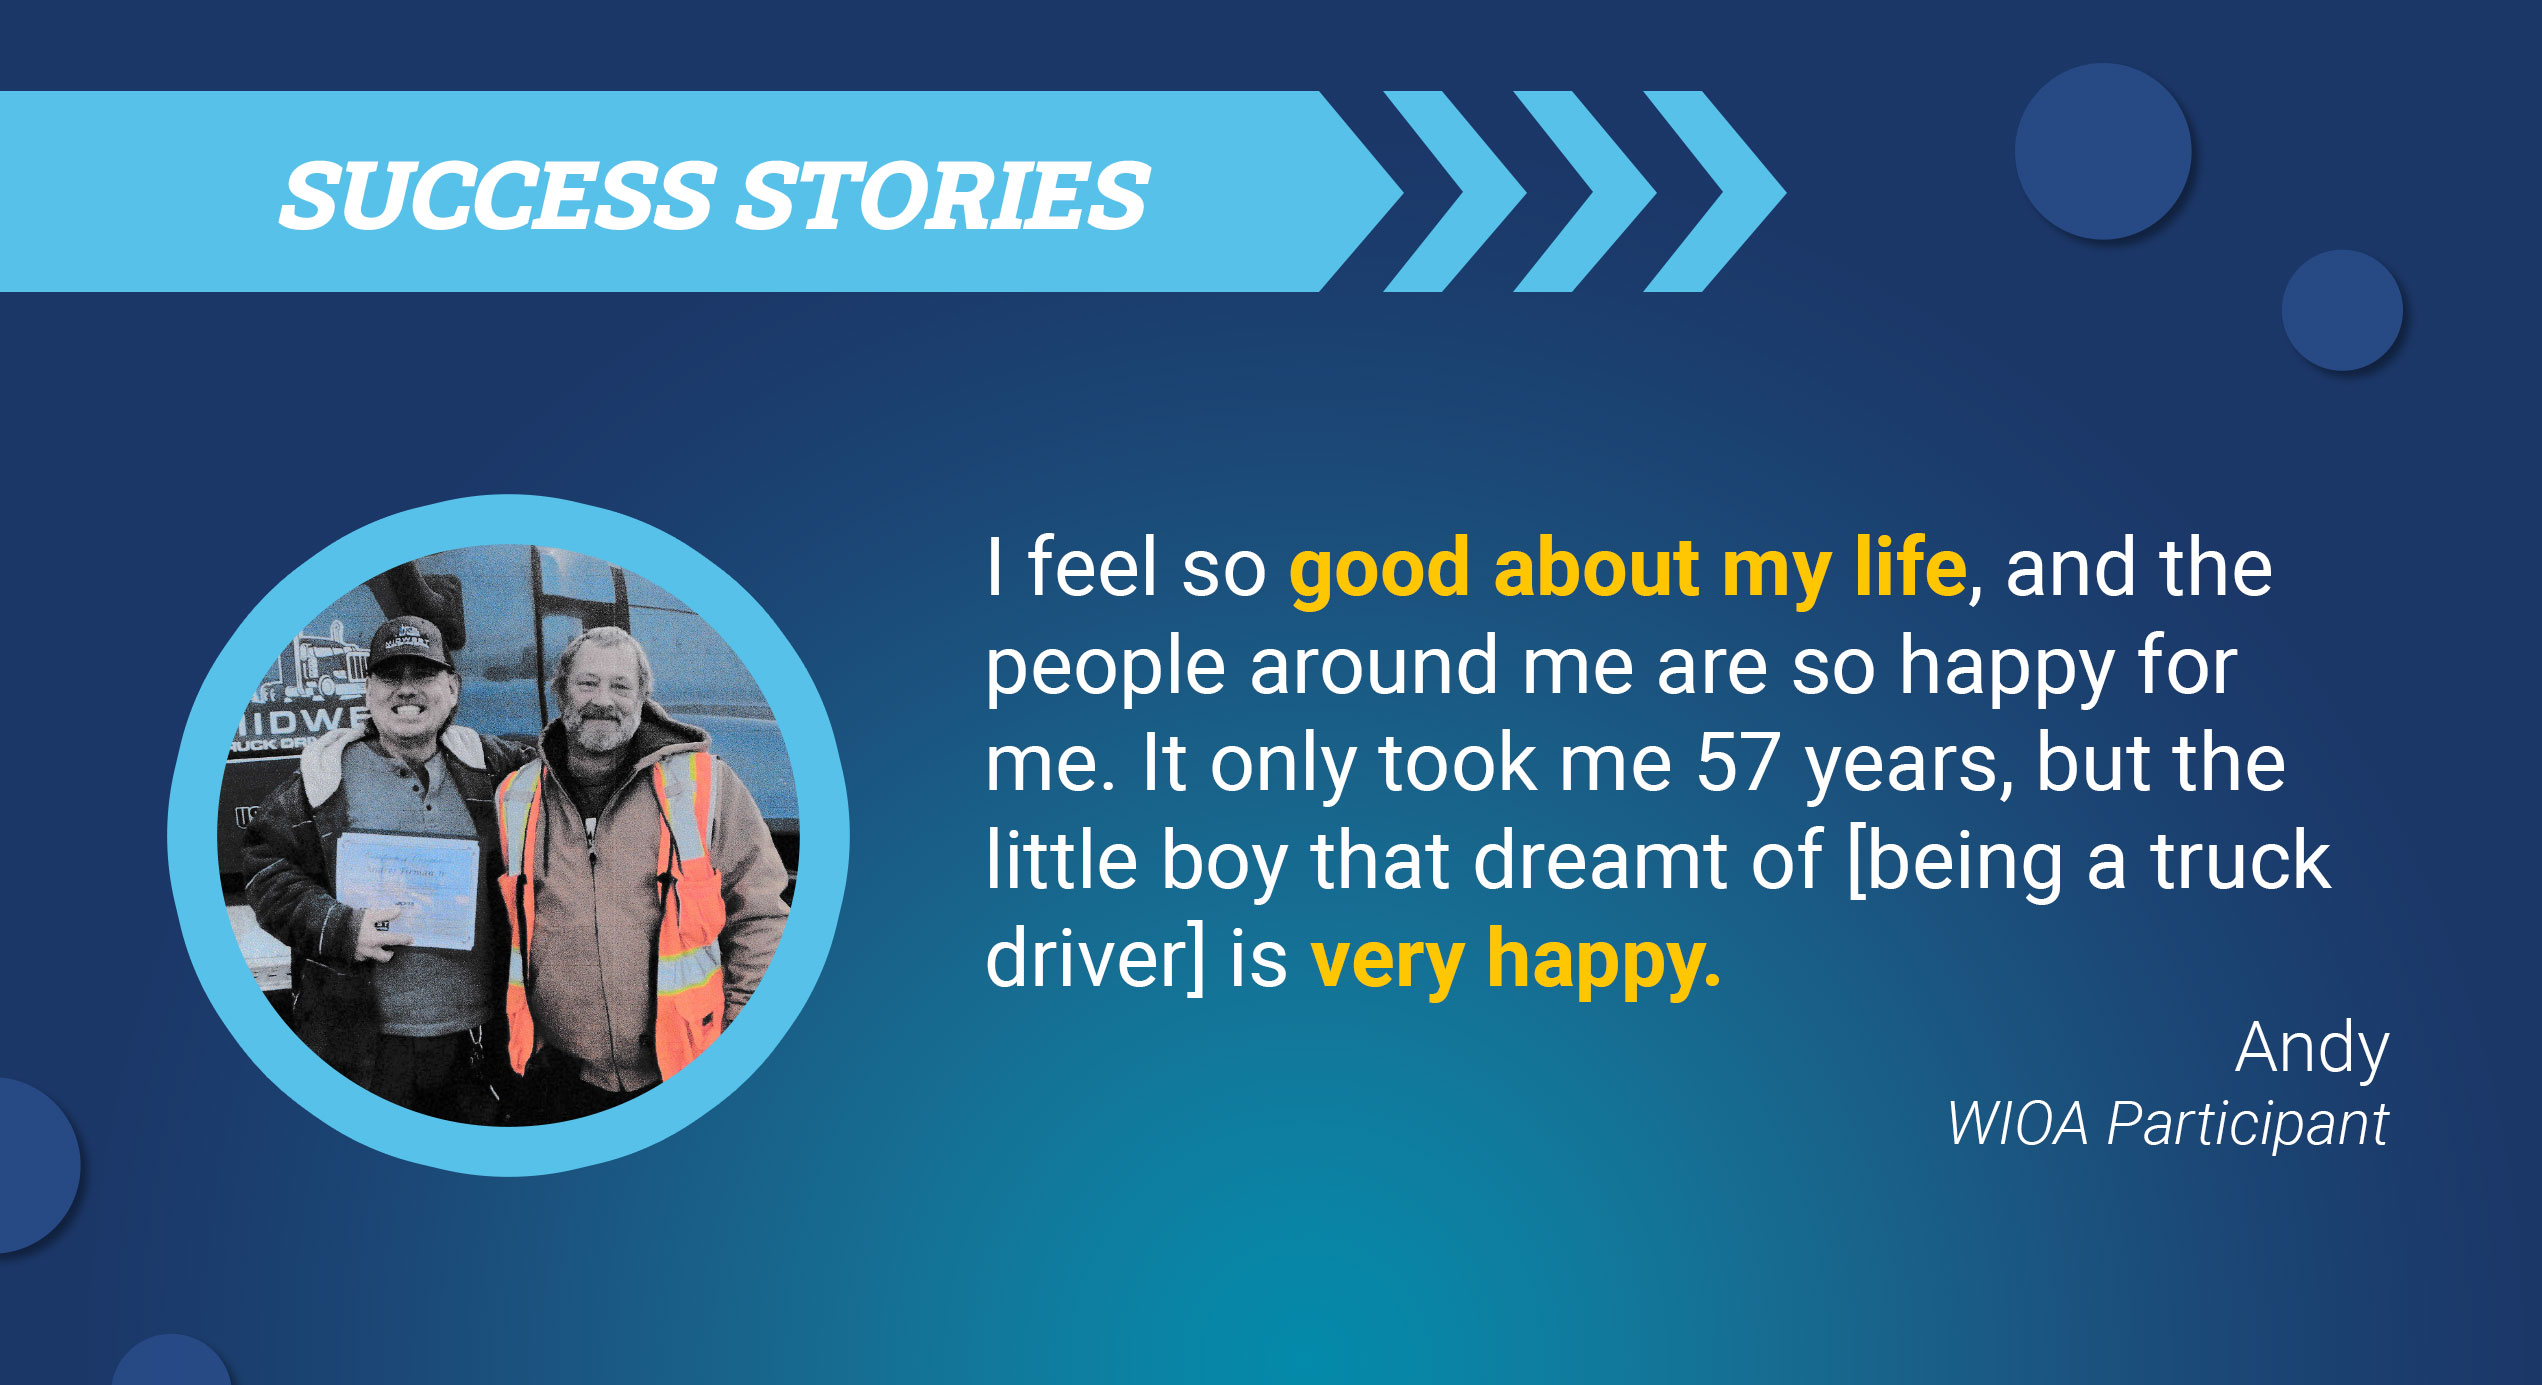 WIOA Story | Andy